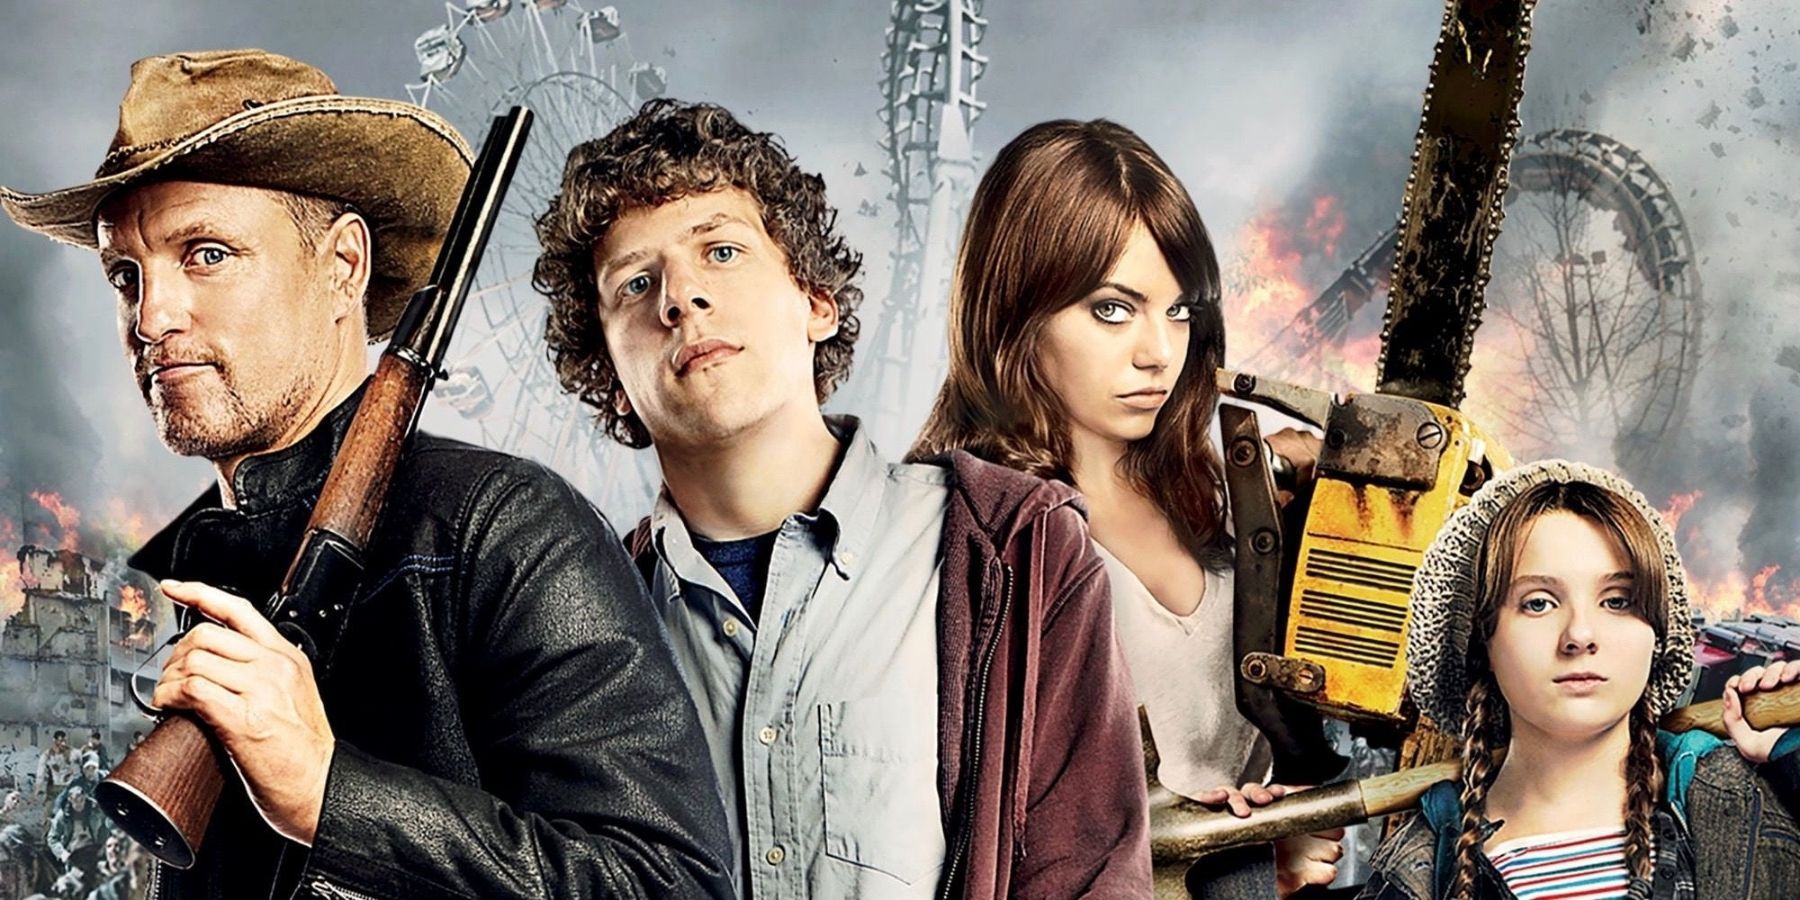 The protagonists in the original Zombieland